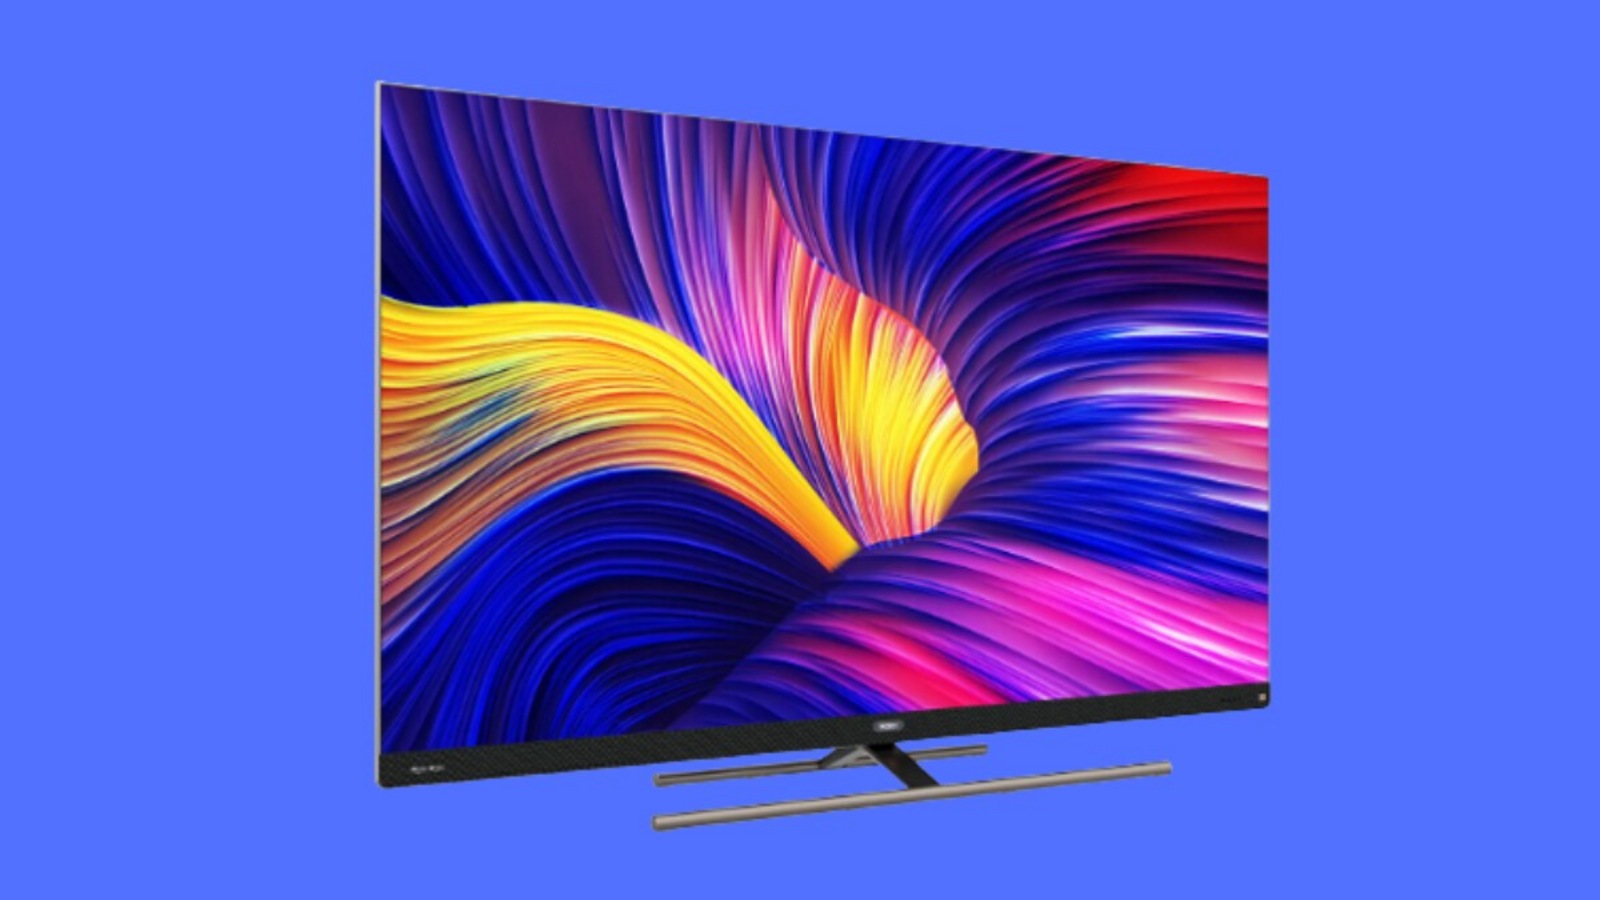 Vu launches world's first 100-inch QLED TV